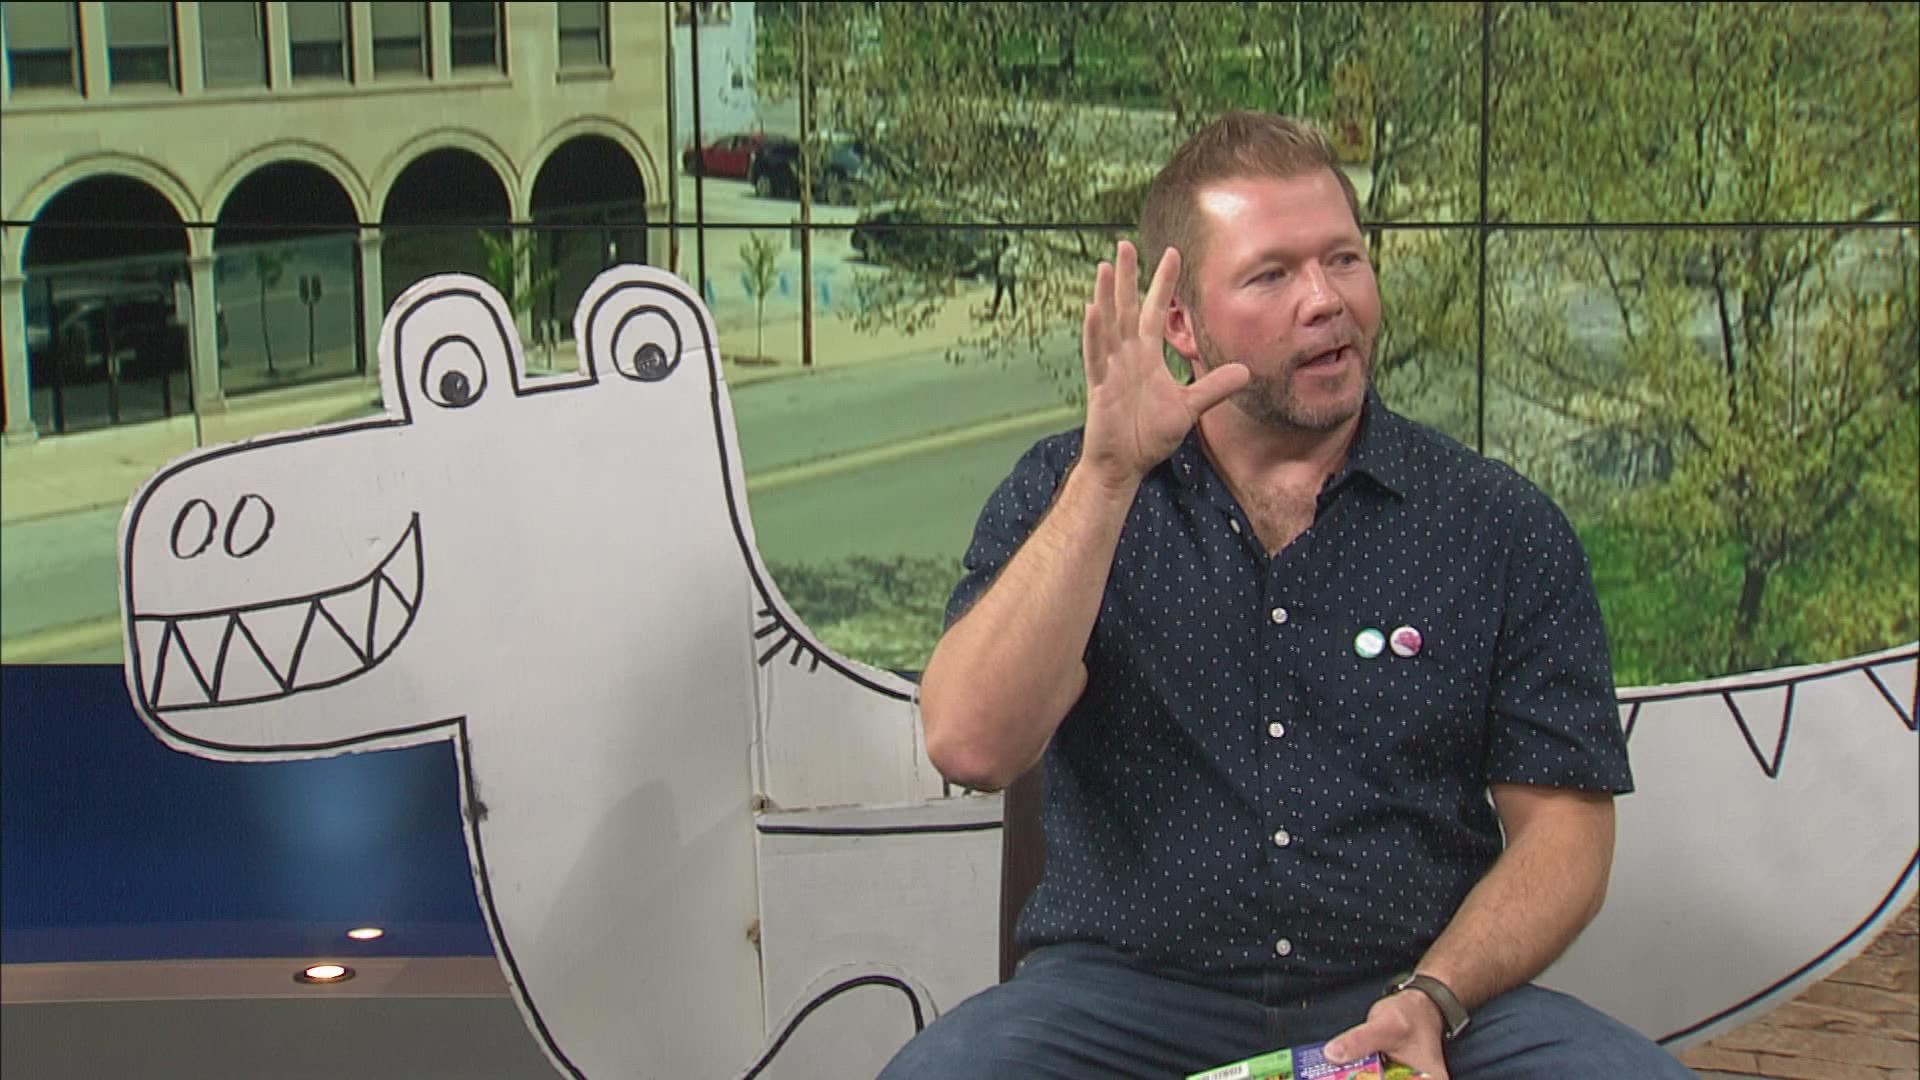 Local children's book illustrator and writer Merrill Rainey joins WTOL 11 to show just how imaginative and creative books can be for kids!